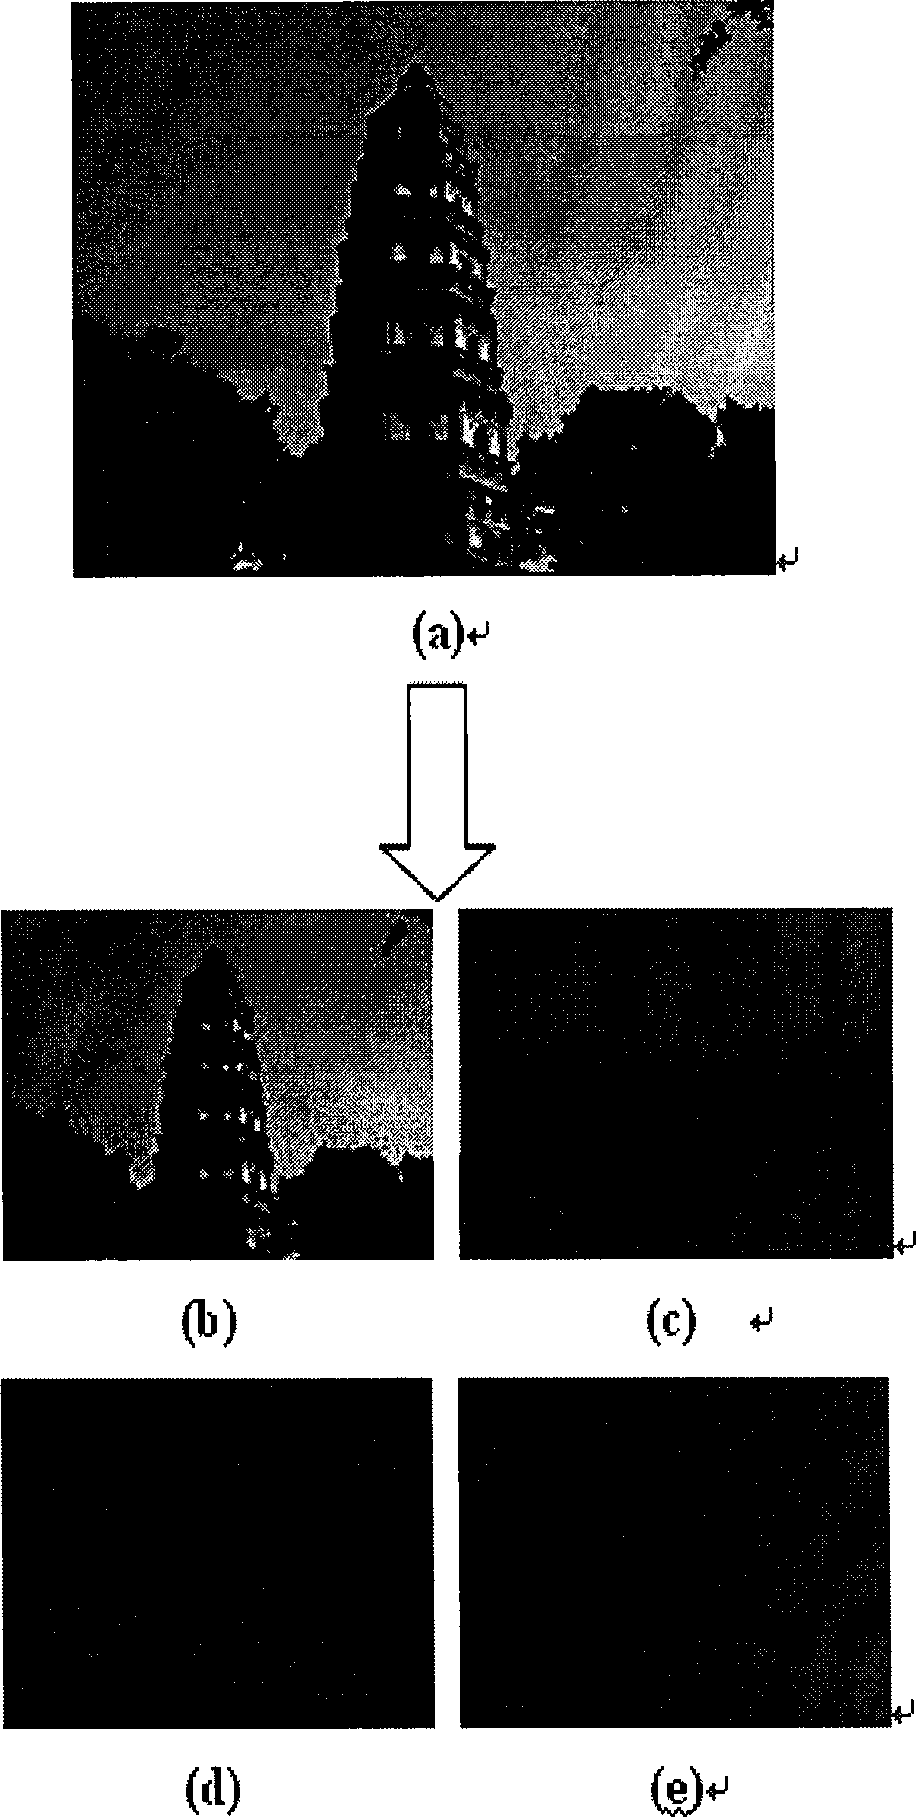 Optimized recognition pretreatment method for human face